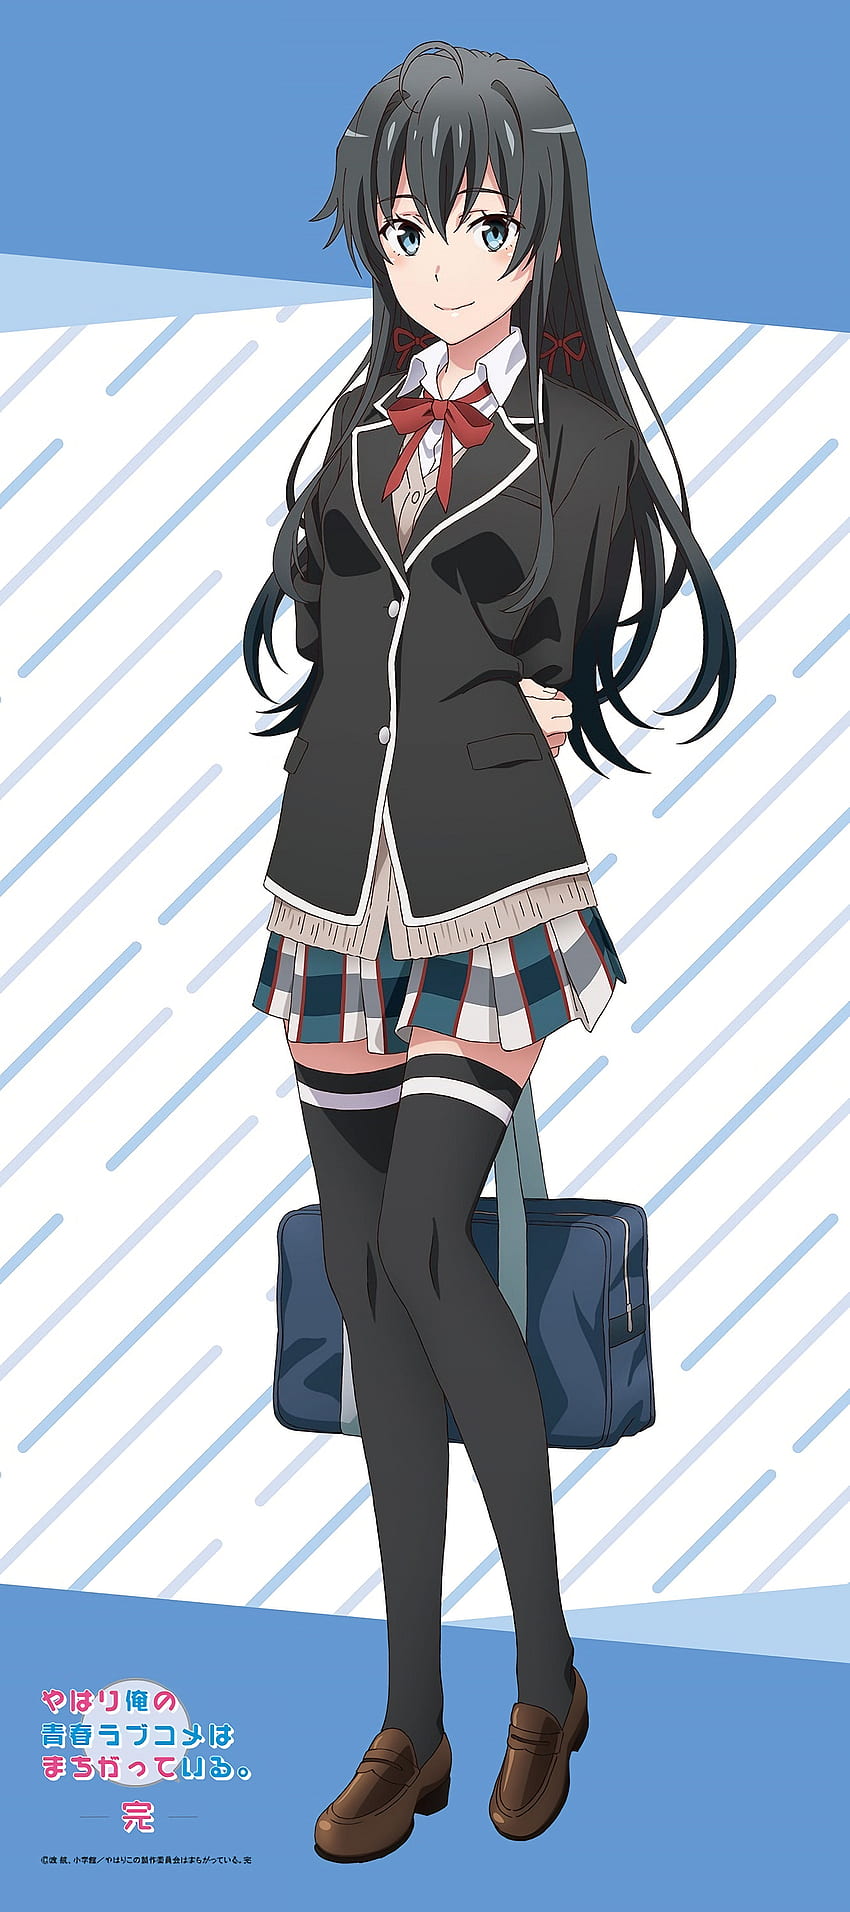 Anime Corner - Yui, we really feel your pain 😢 Vote Oregairu as the best  Week 3 episode at: https://bit.ly/best-episode | Facebook